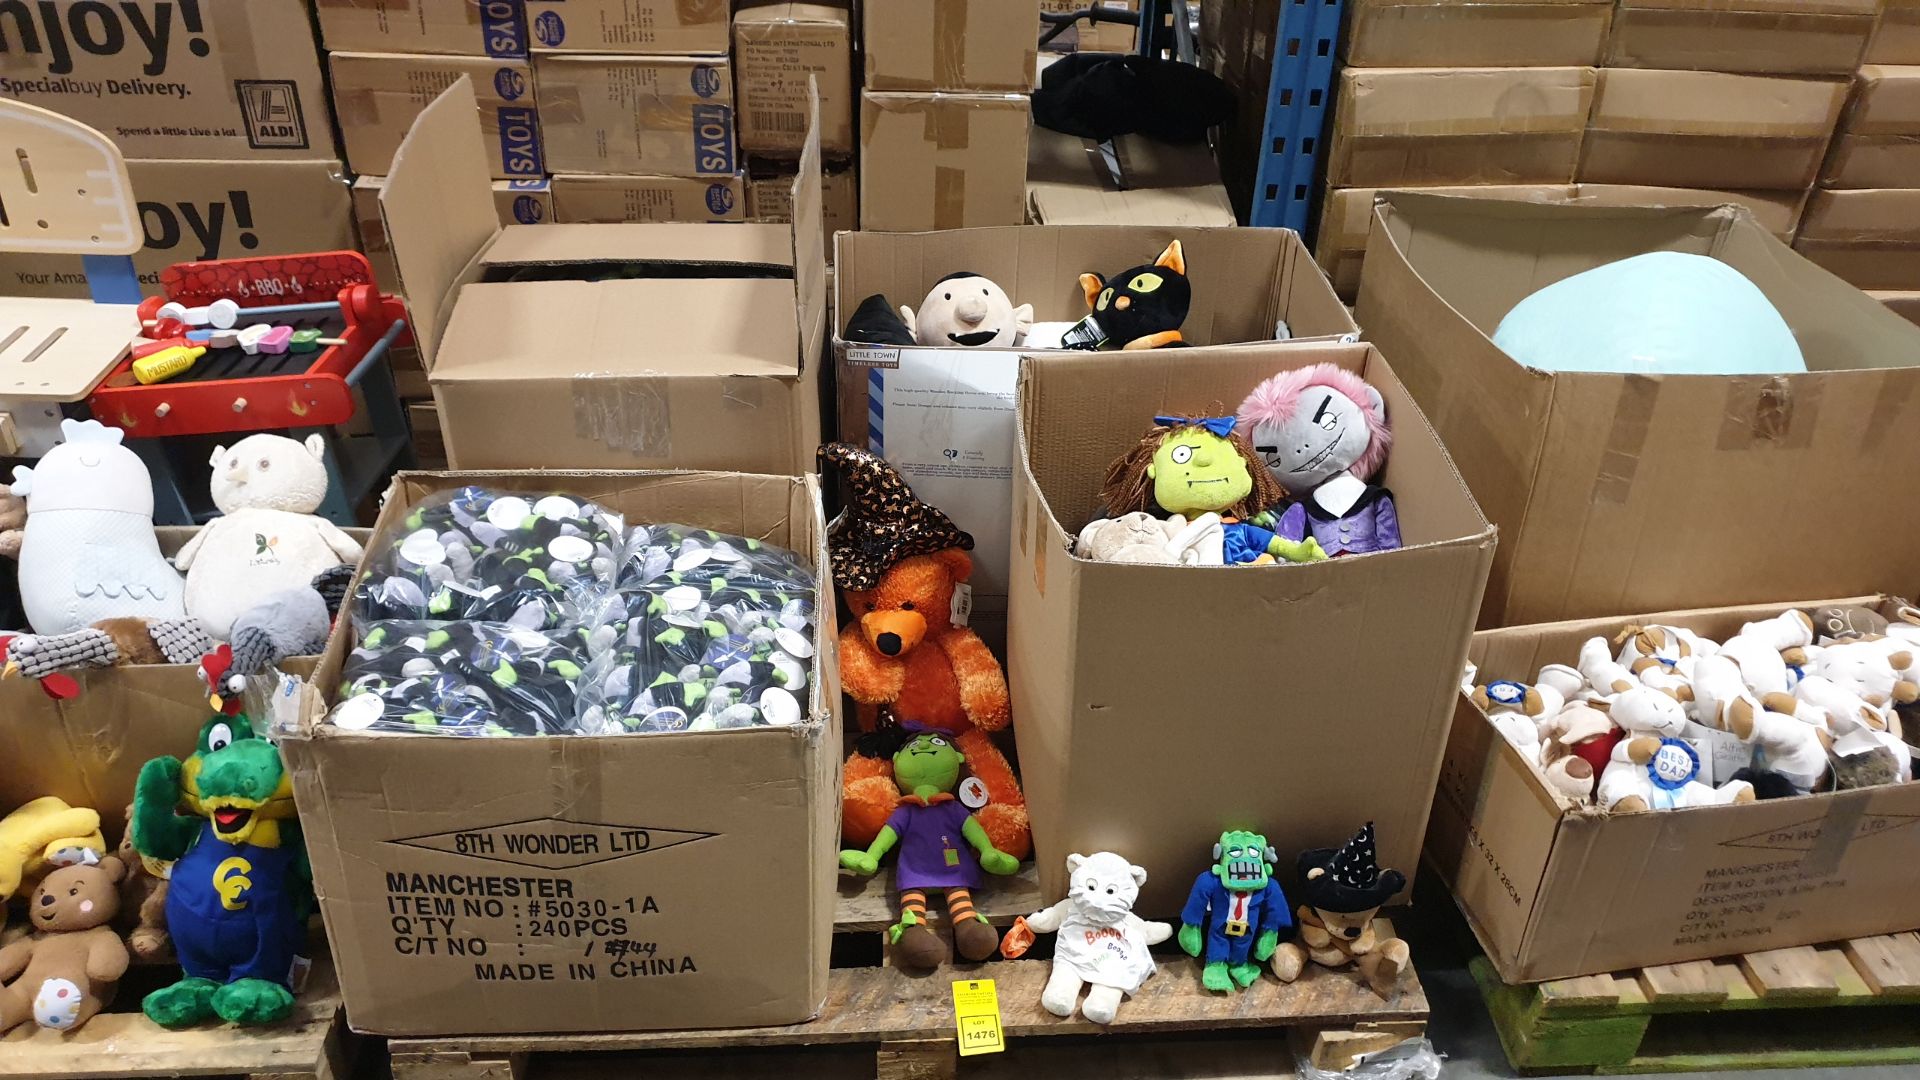 (LOT FOR THURSDAY 28TH MAY AUCTION) PALLET CONTAINING LARGE QUANTITY OF VARIOUS HALLOWEEN TEDDYS (